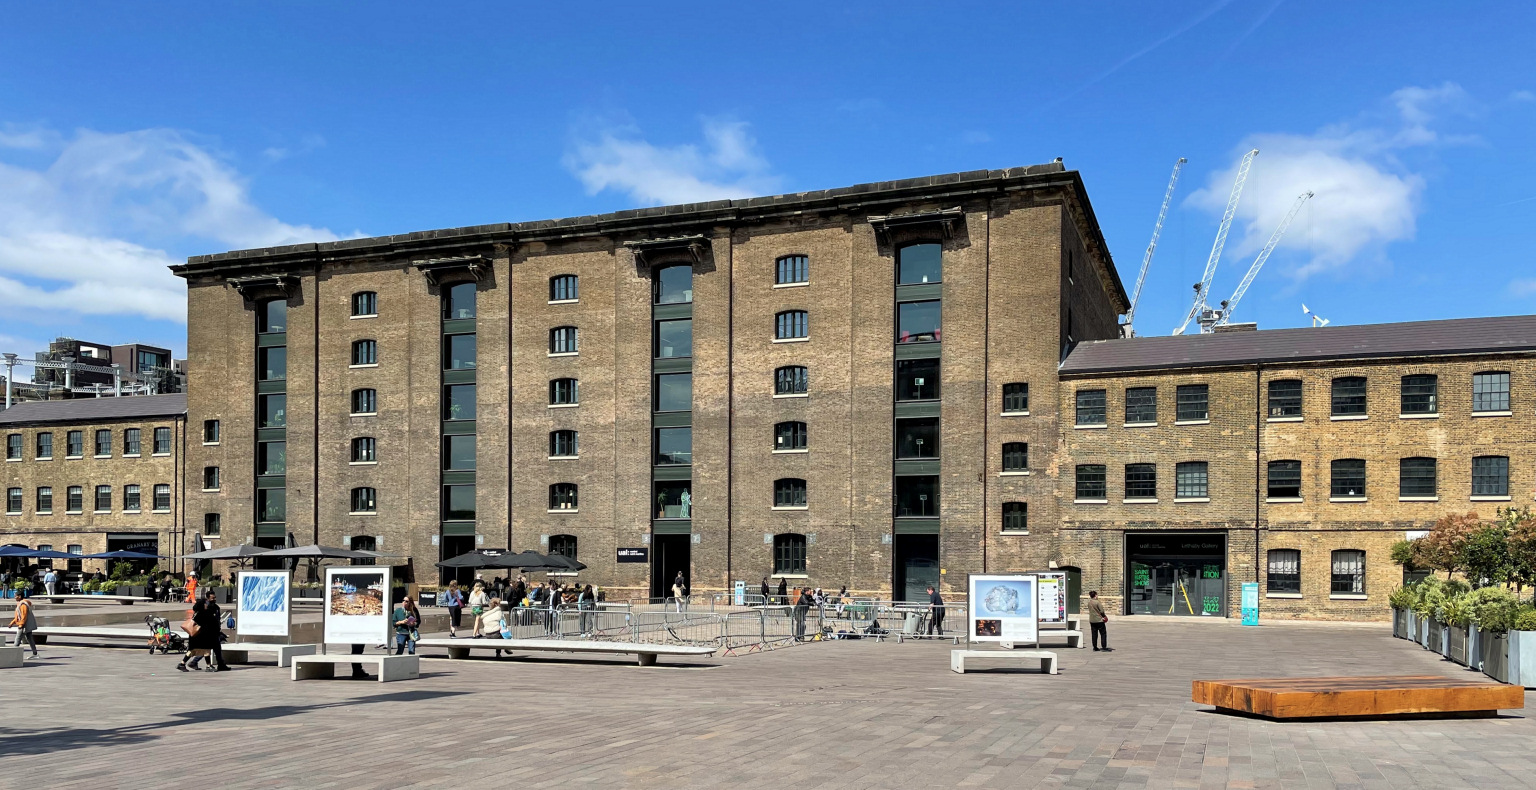 Granary Square and the Granary, photographed in May 2022